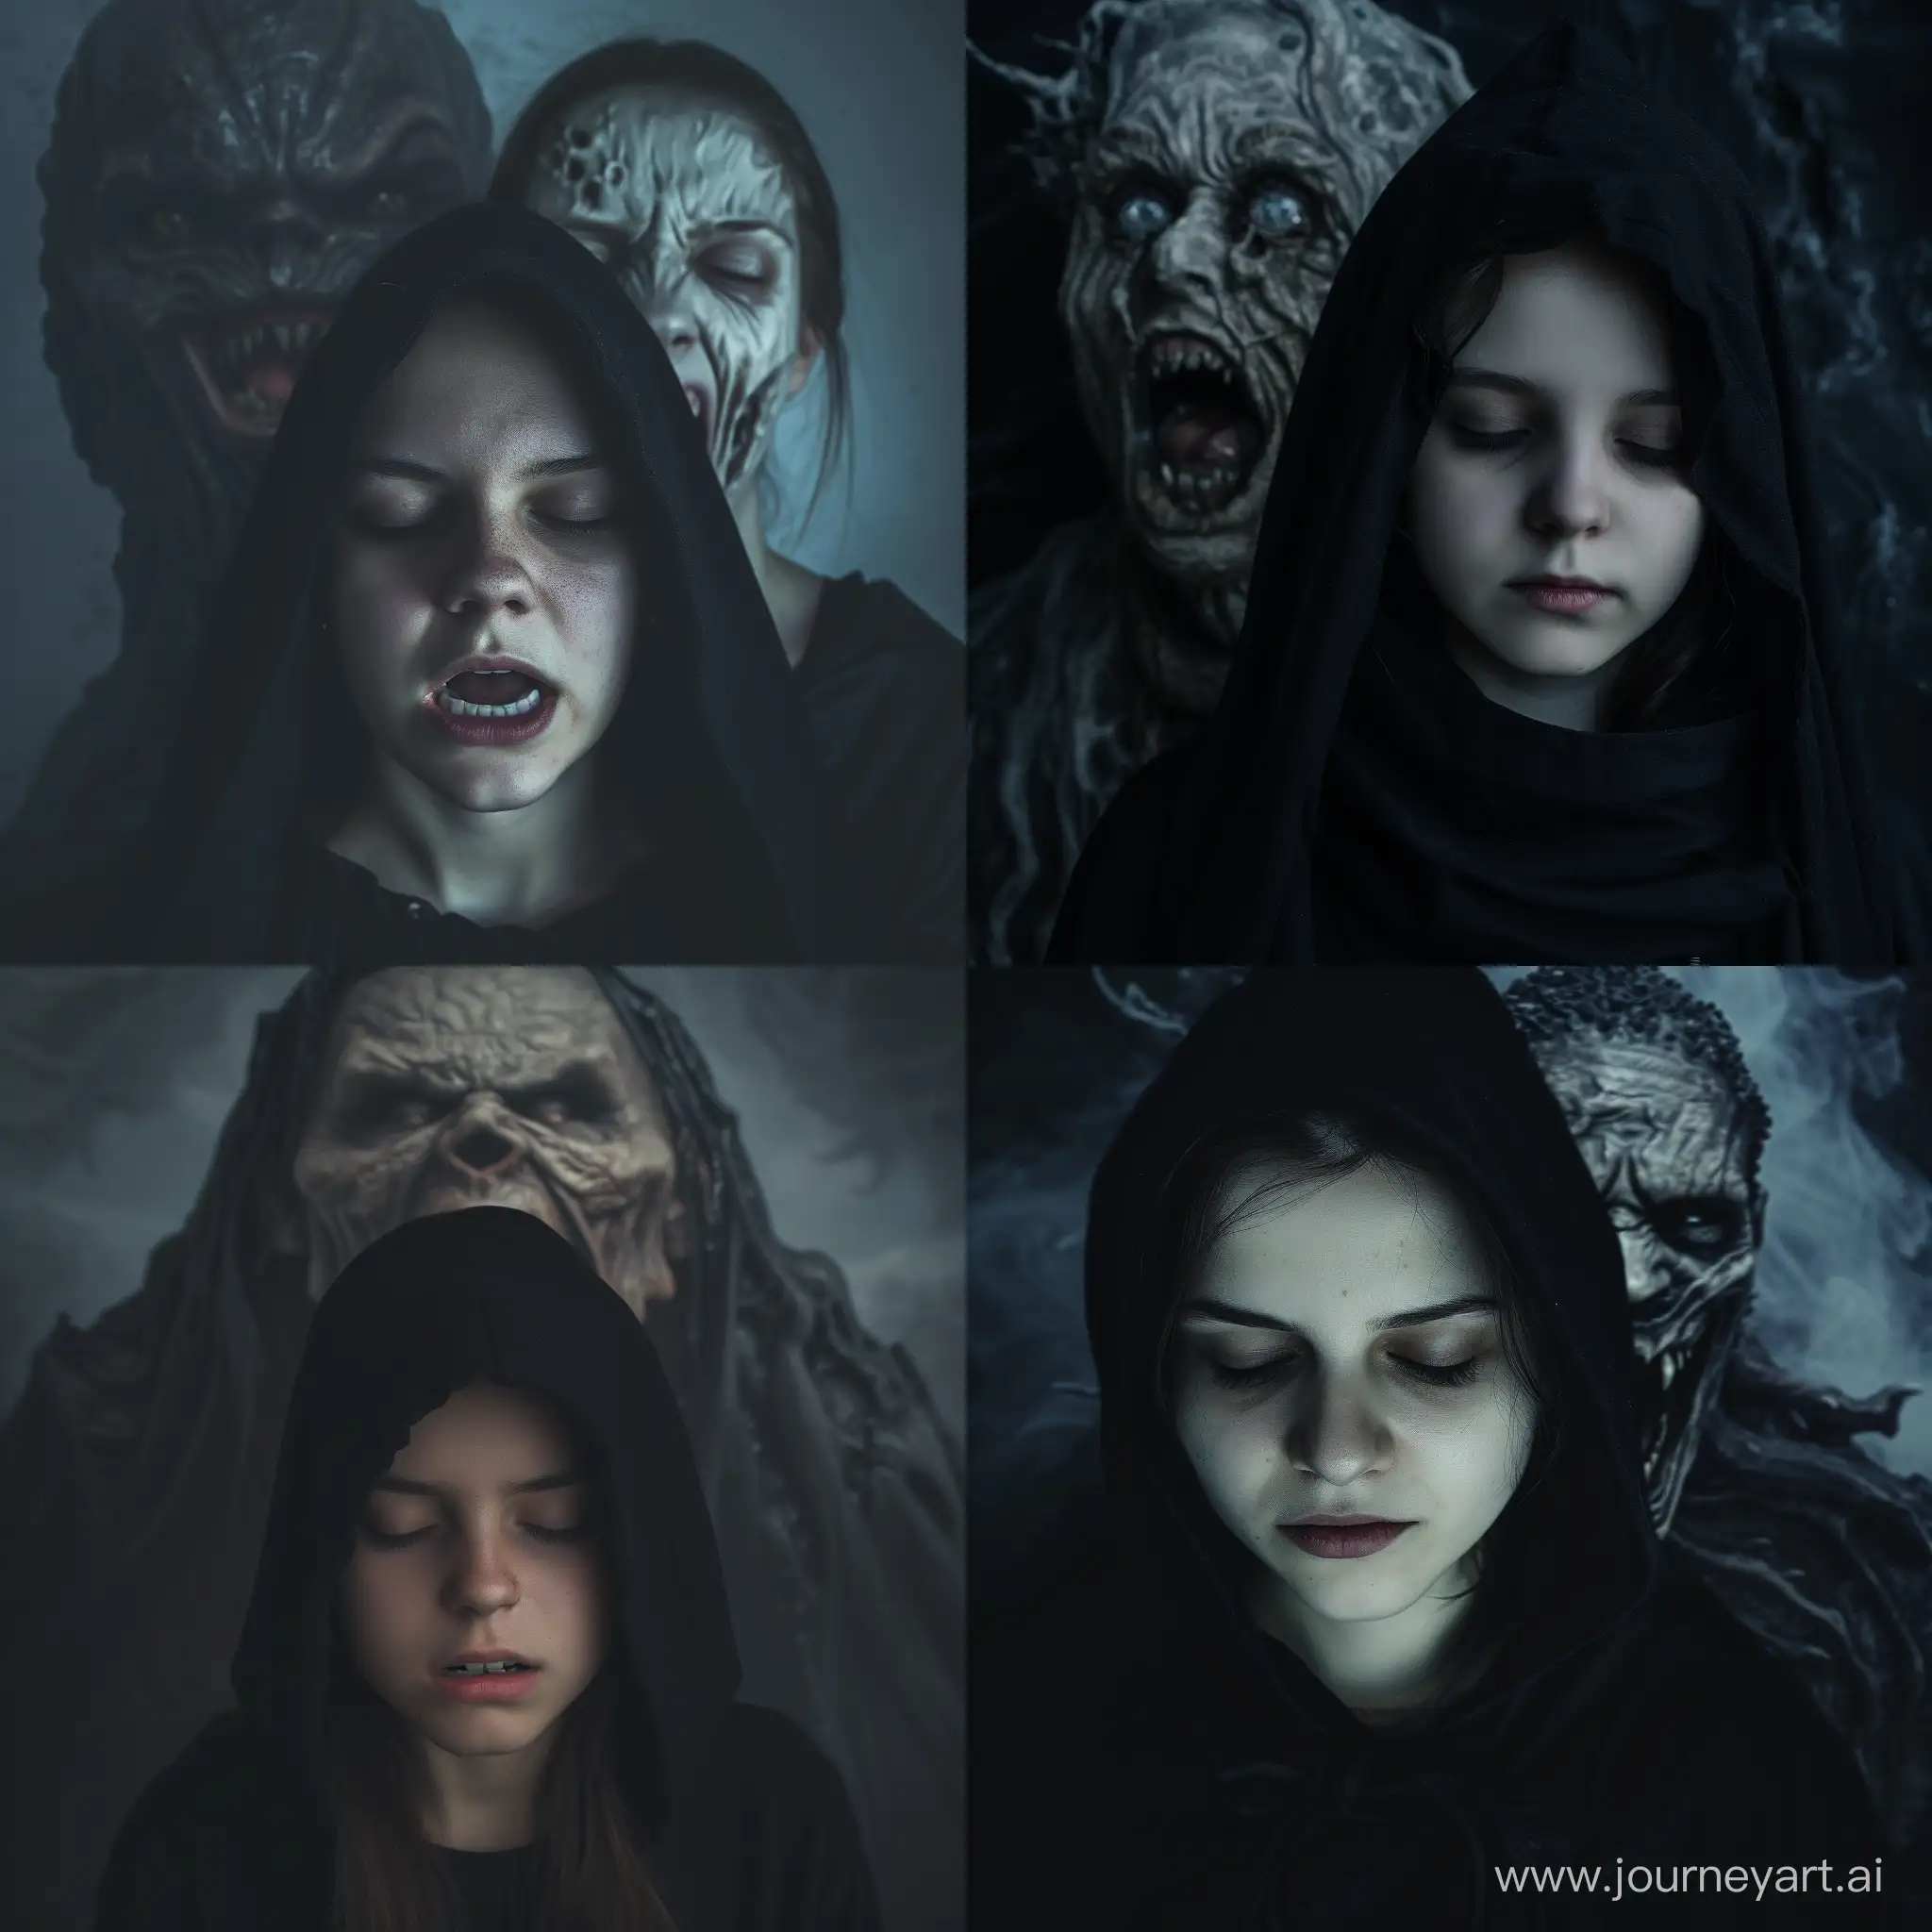 Portrait of Mysterious creepy girl with black hood. Her eyes are closed. There is a creepy creature with distorted face behind her. That creature is shouting. Dark themed photography.